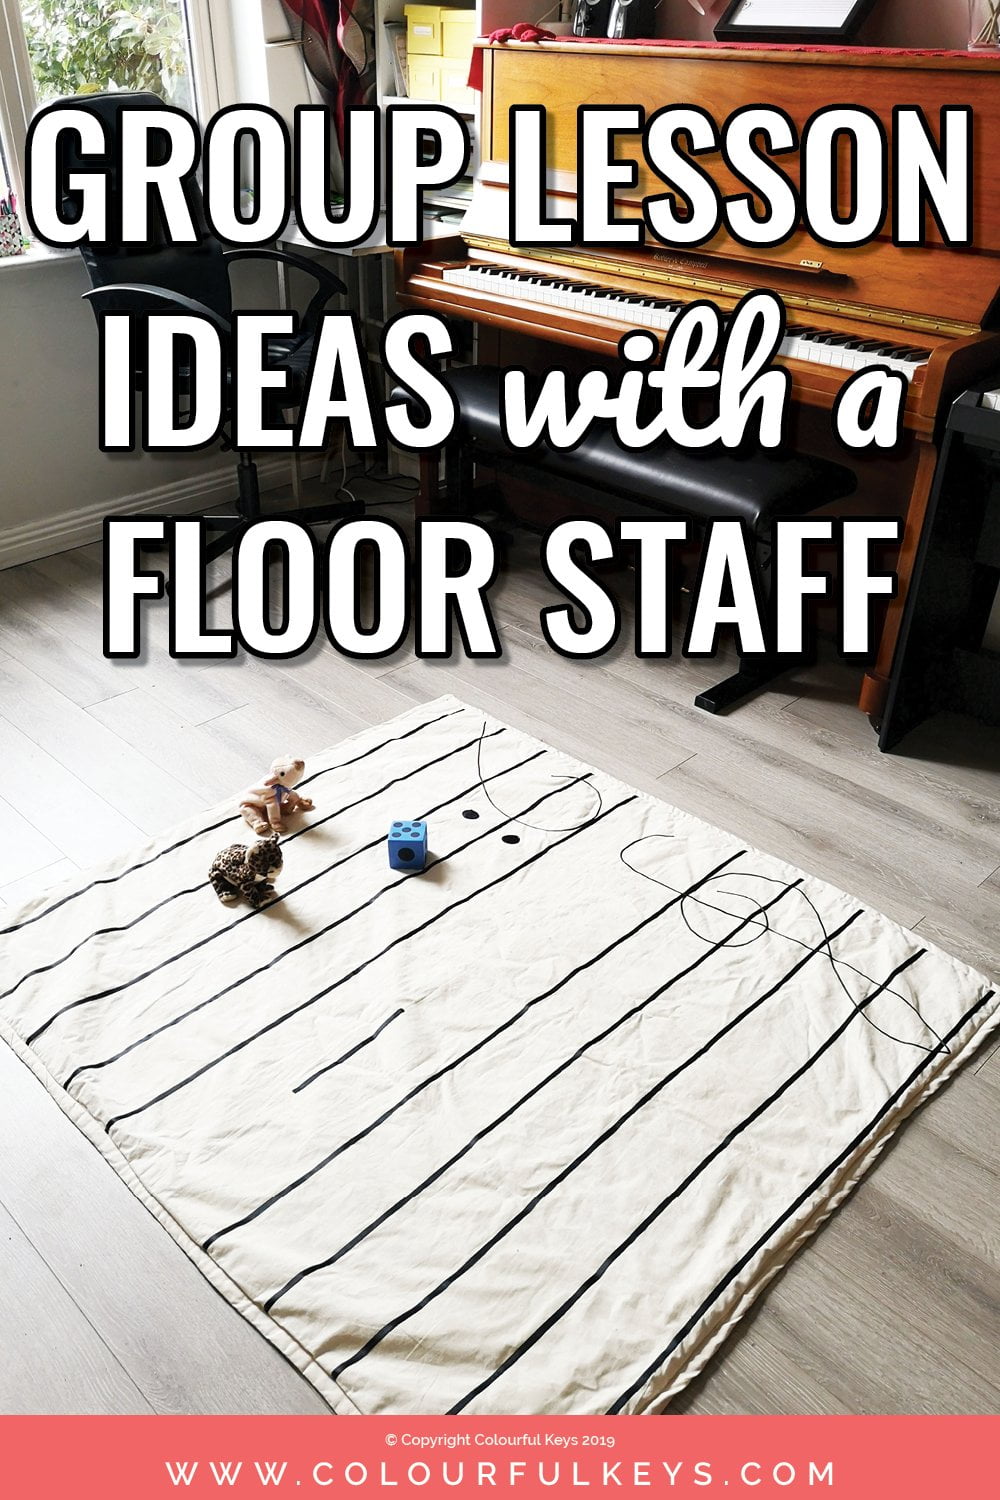 ideas for using a floor staff in group lessons and how to make a floor staff